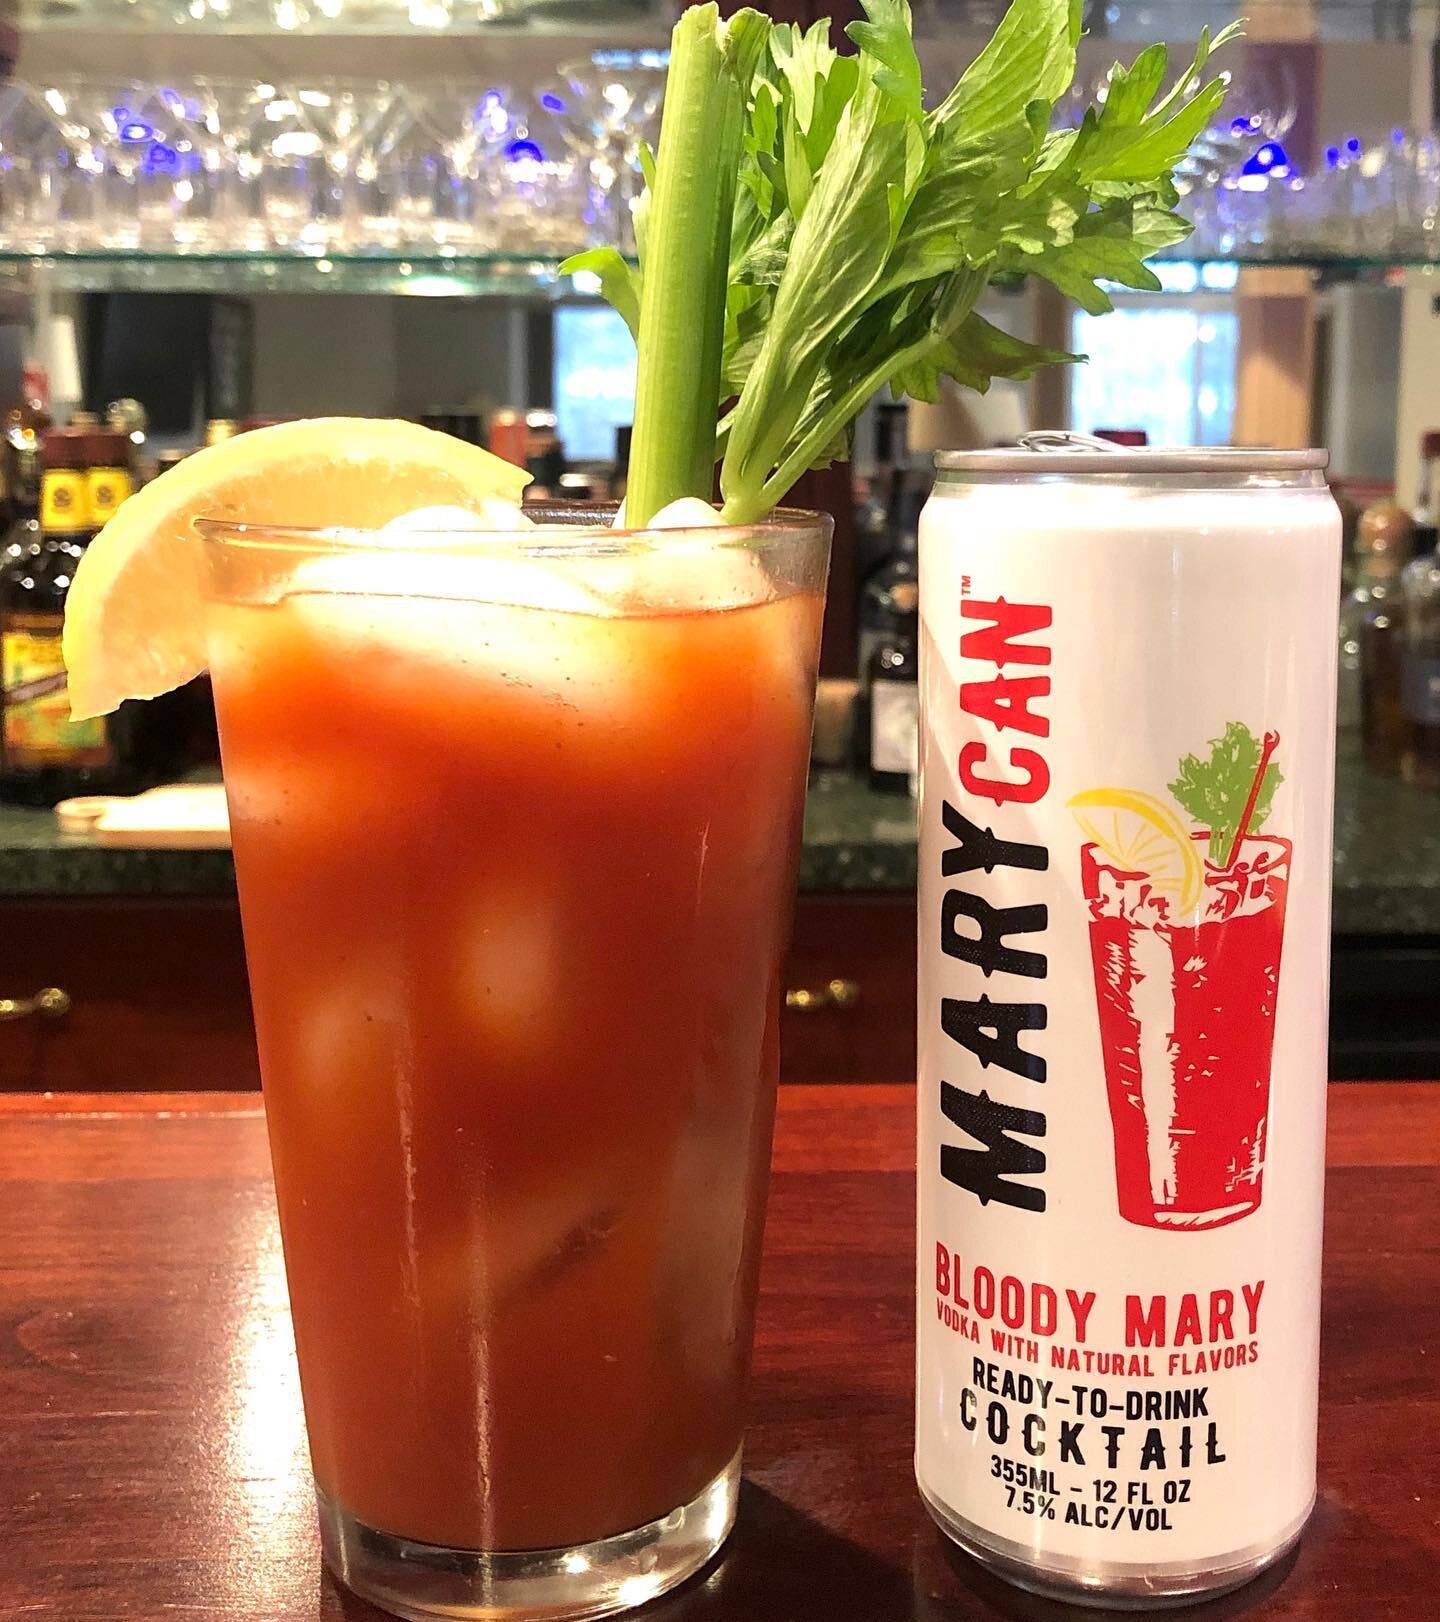 Want to know what goes great with the NFL Playoffs? MaryCan canned Bloody Marys! Just shake it, pour over ice and enjoy. Top it with your favorite garnishes or drink as is!

These ready to drink Bloody Marys are made with real vodka and all natural i